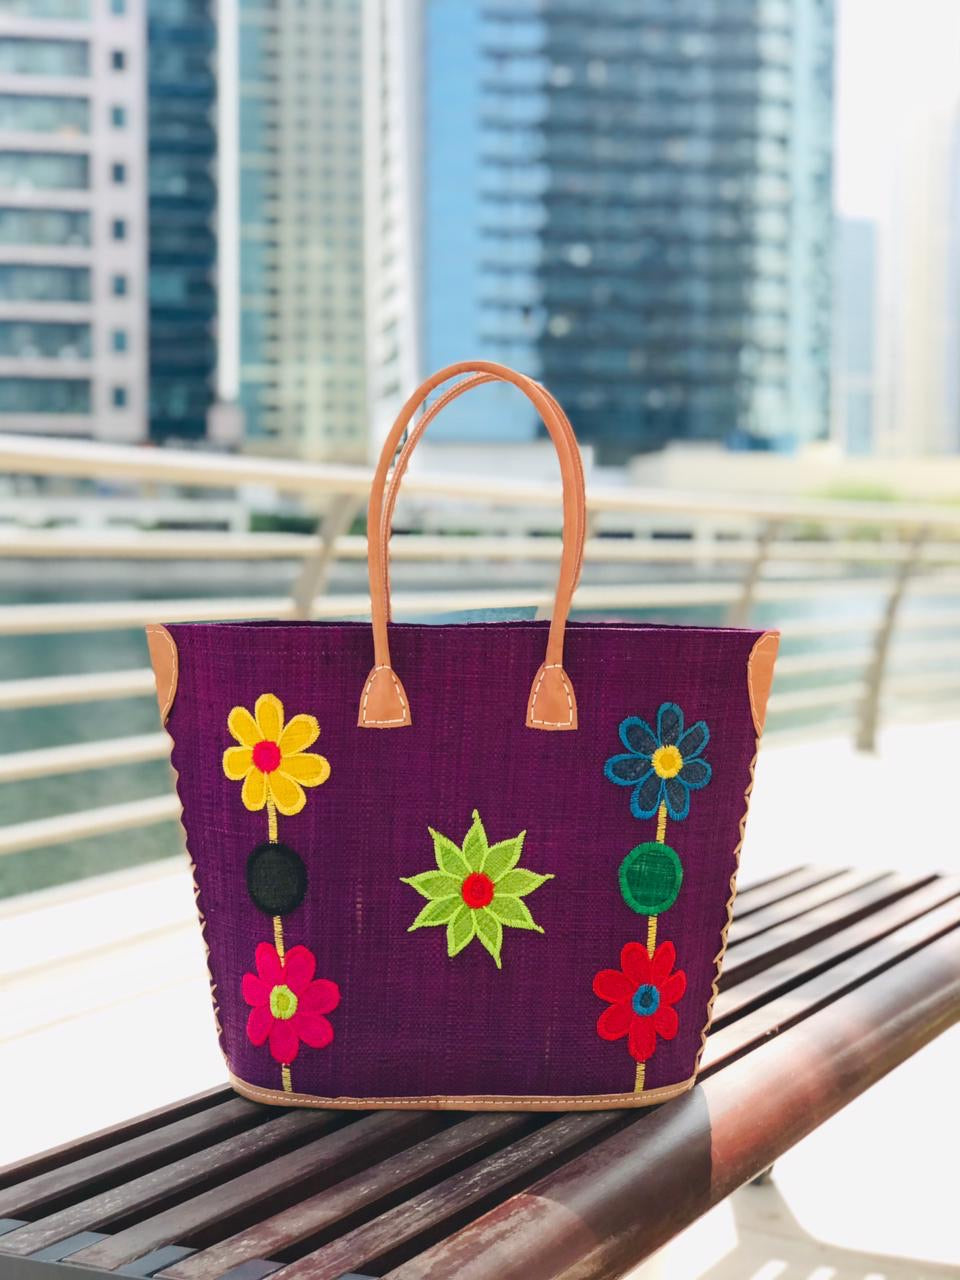 Purple bag with flowers